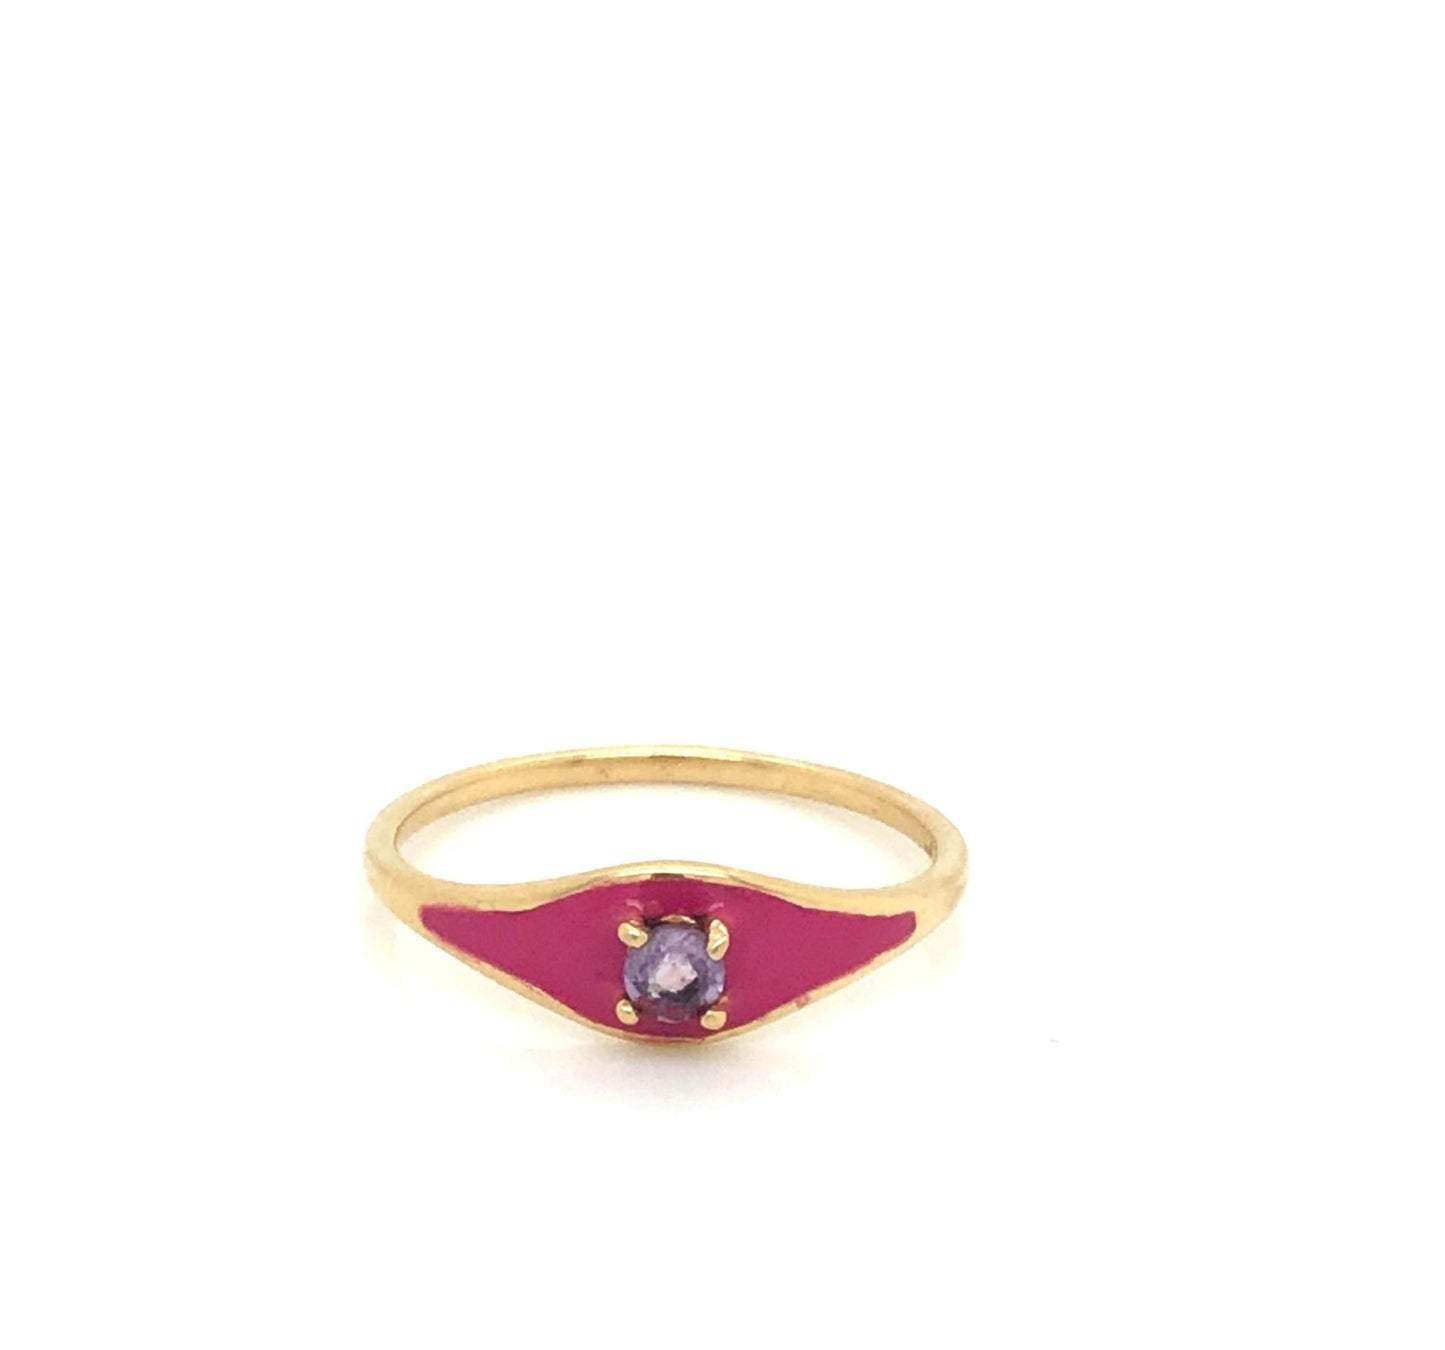 IMMEDIATE DELIVERY / Ring with Enameled Band / 14k Yellow Gold / Size 7.75